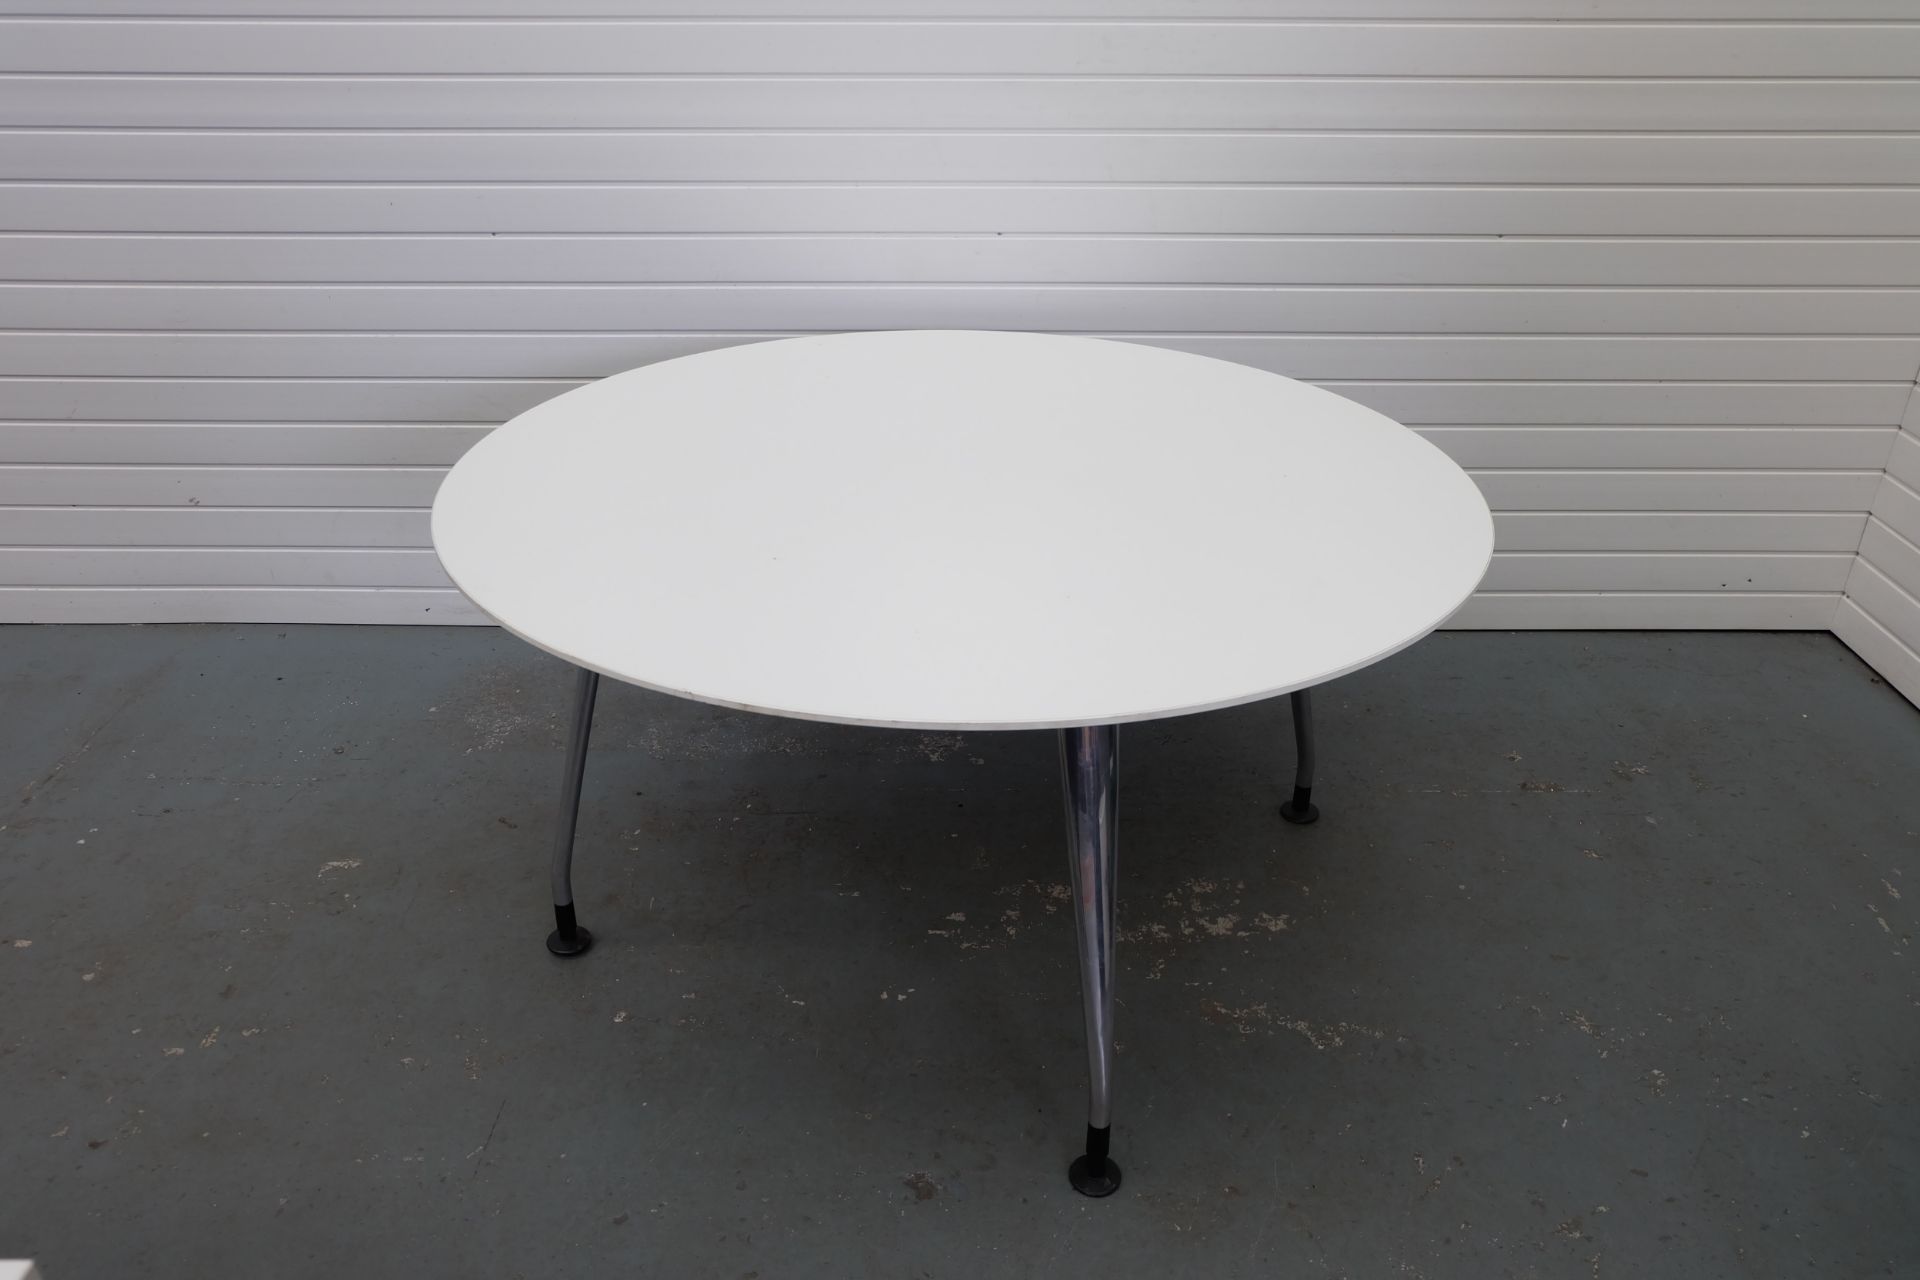 White Round Table. 4 Metal Legs and Adjustable Feet. Size 1500mm Diameter x 800mm High.